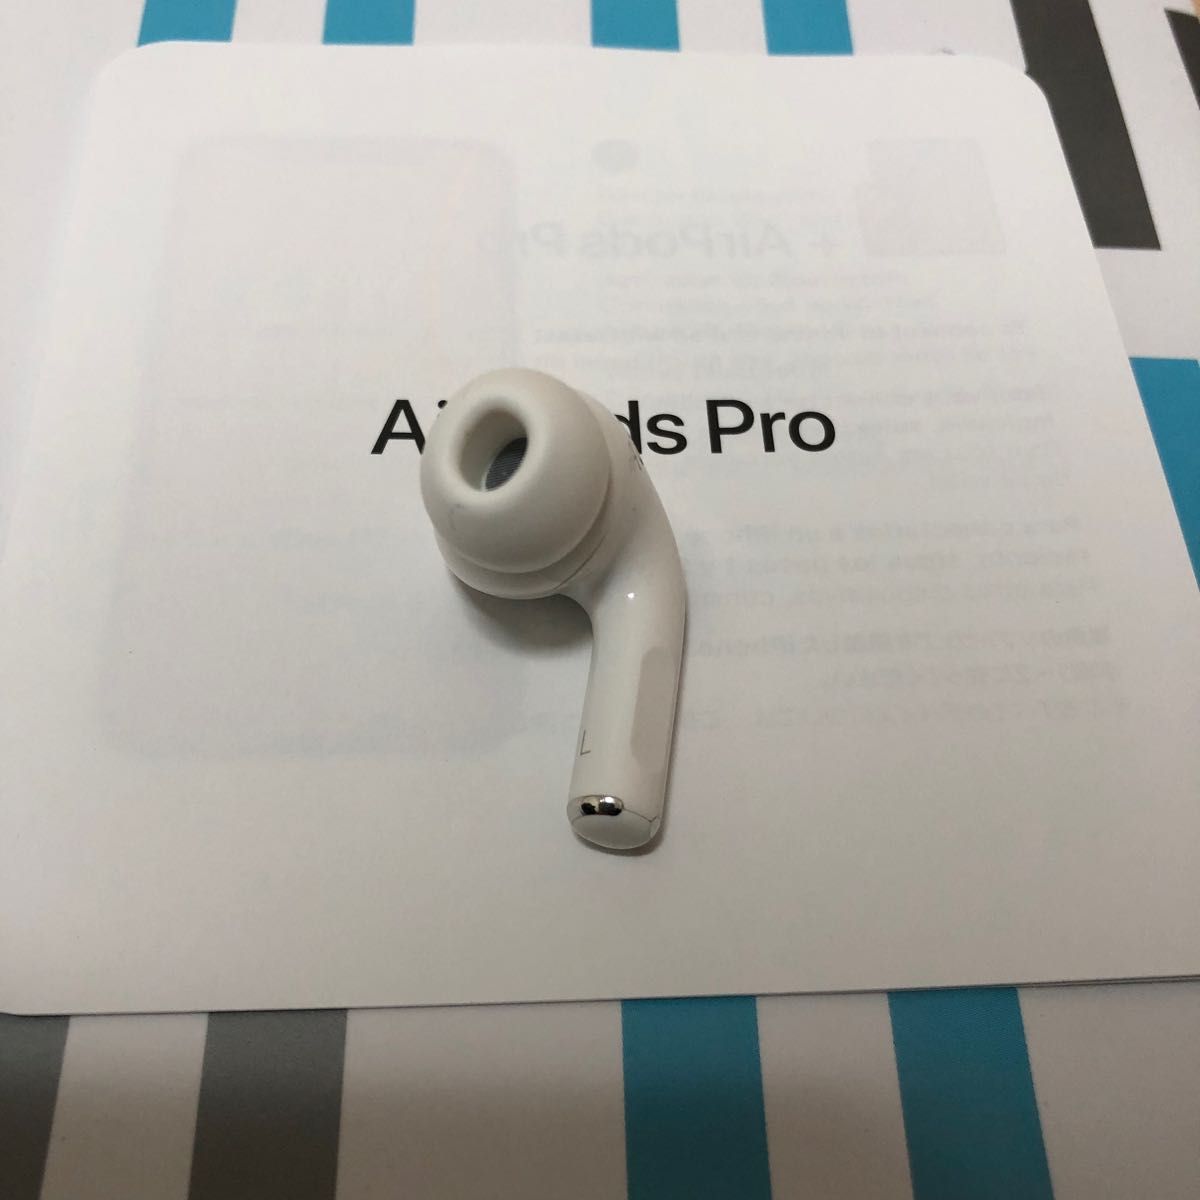 AirPods Pro 第一世代 左耳のみ 国内正規品｜PayPayフリマ